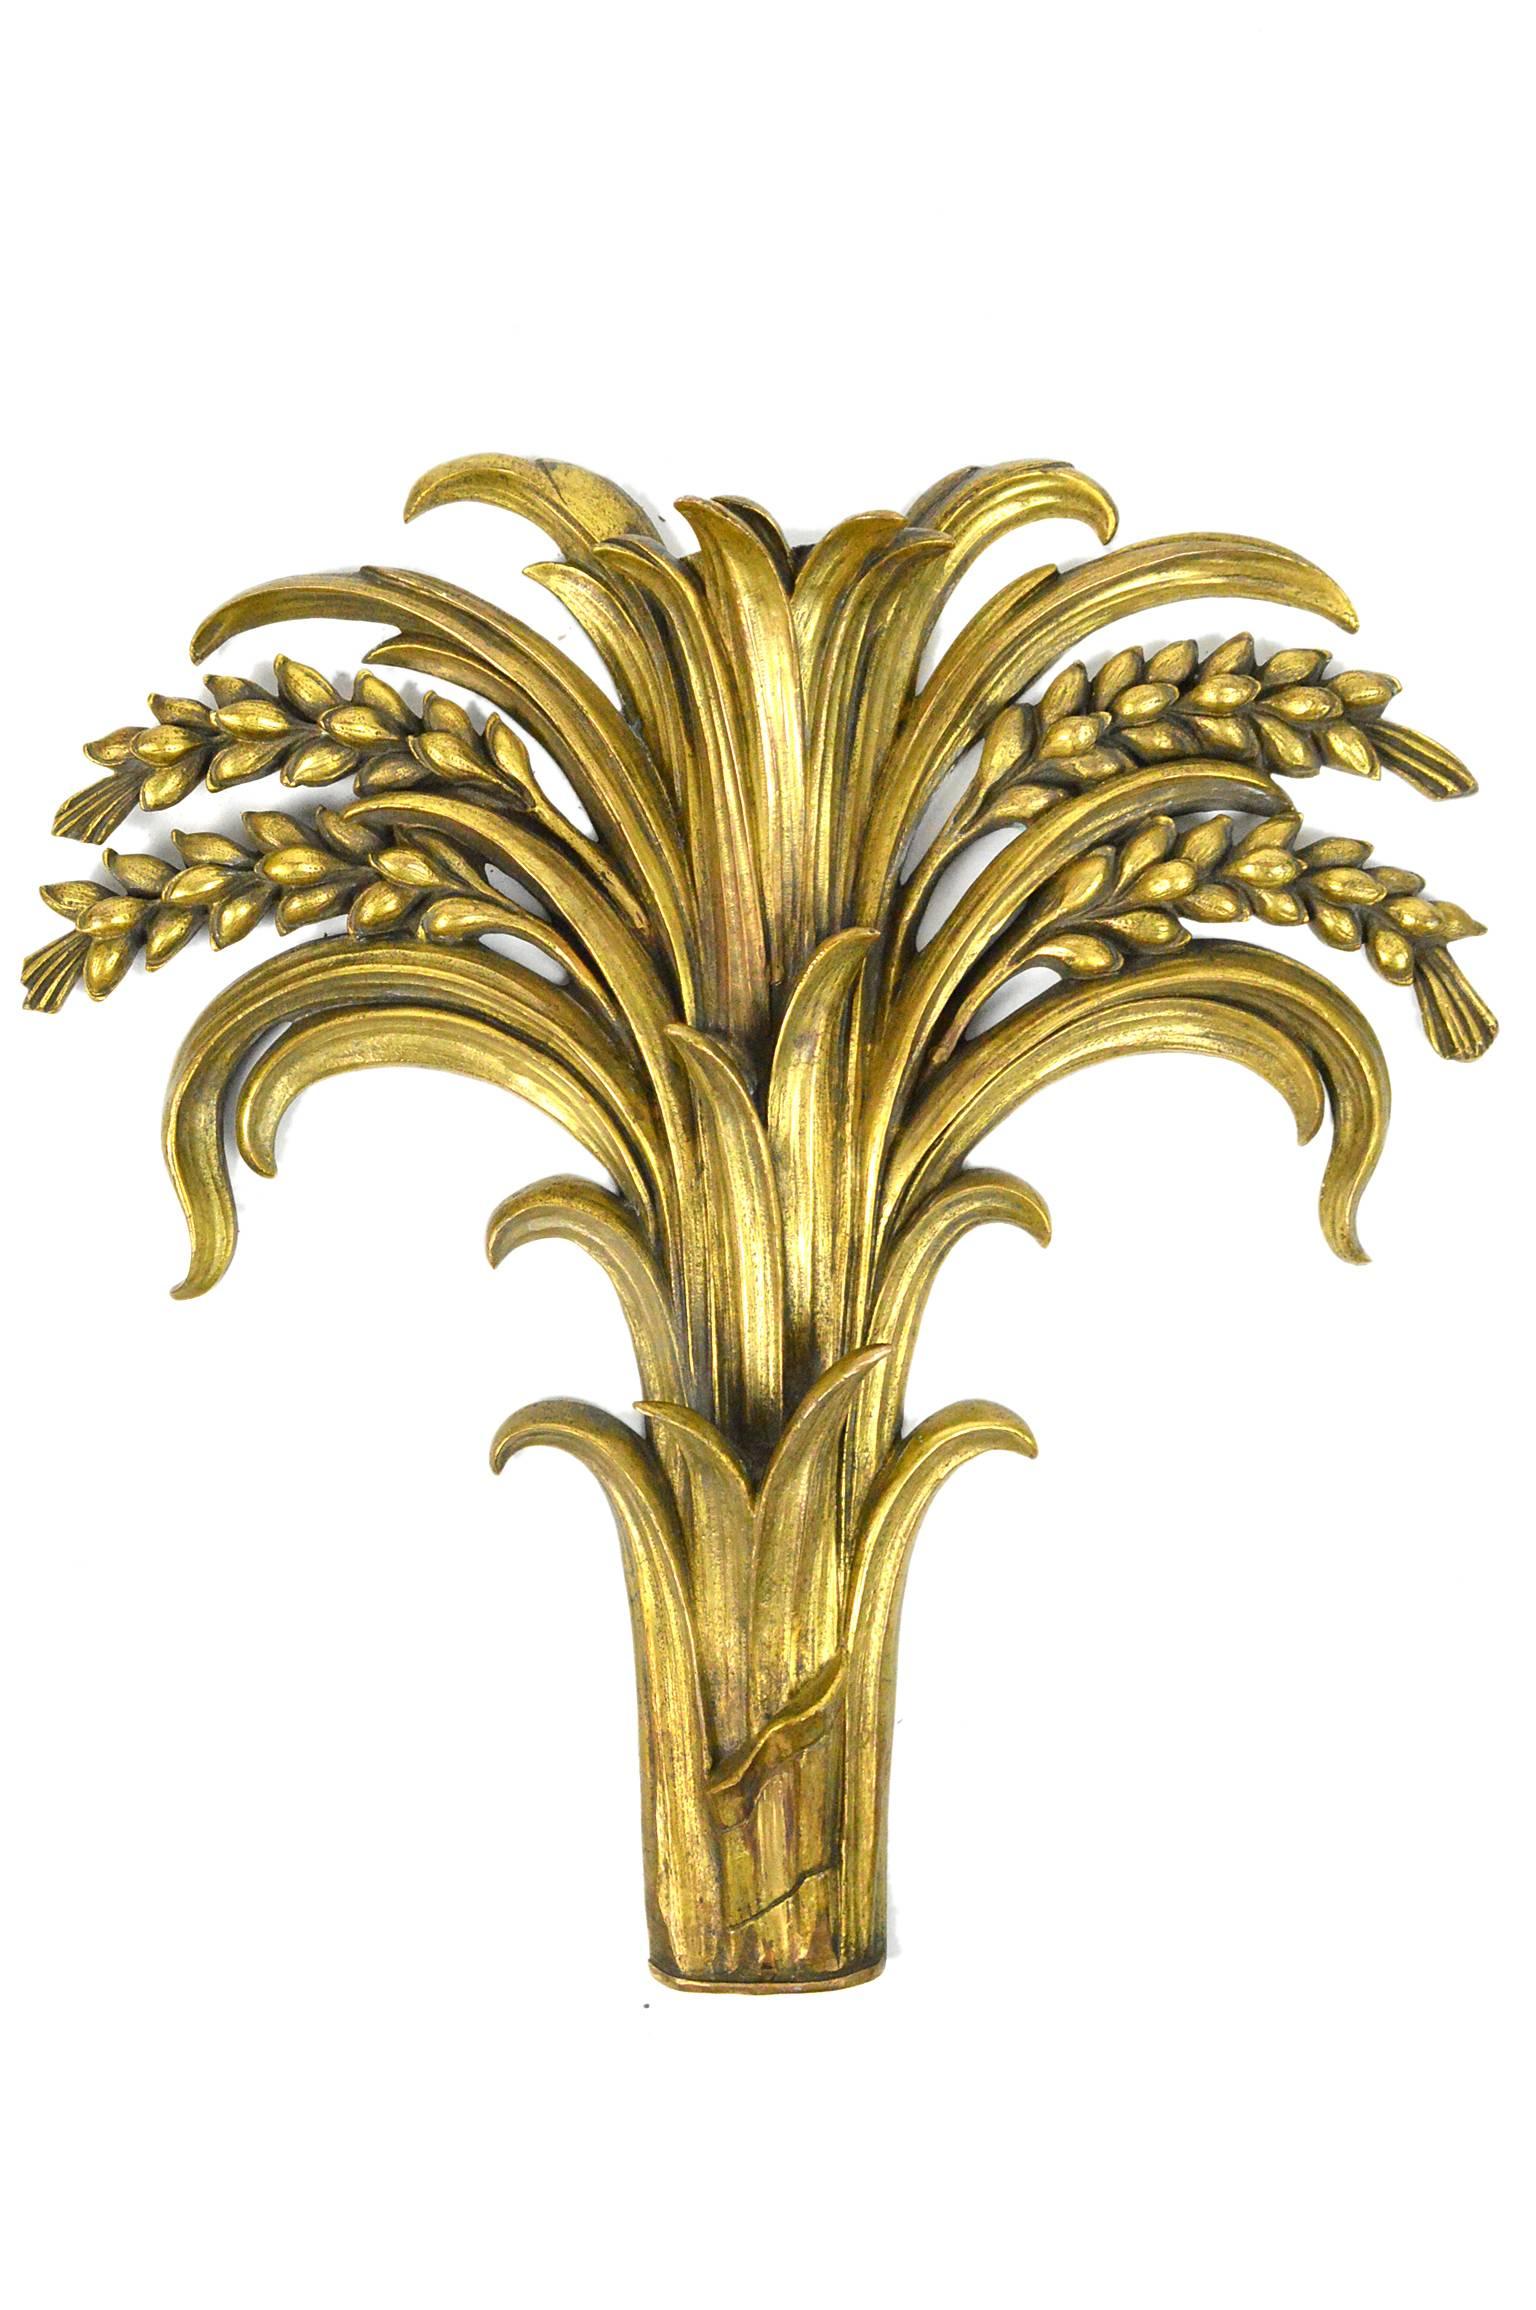 Pair of French deco gilt bronze architectural elements with finely cast details and beautiful patina.